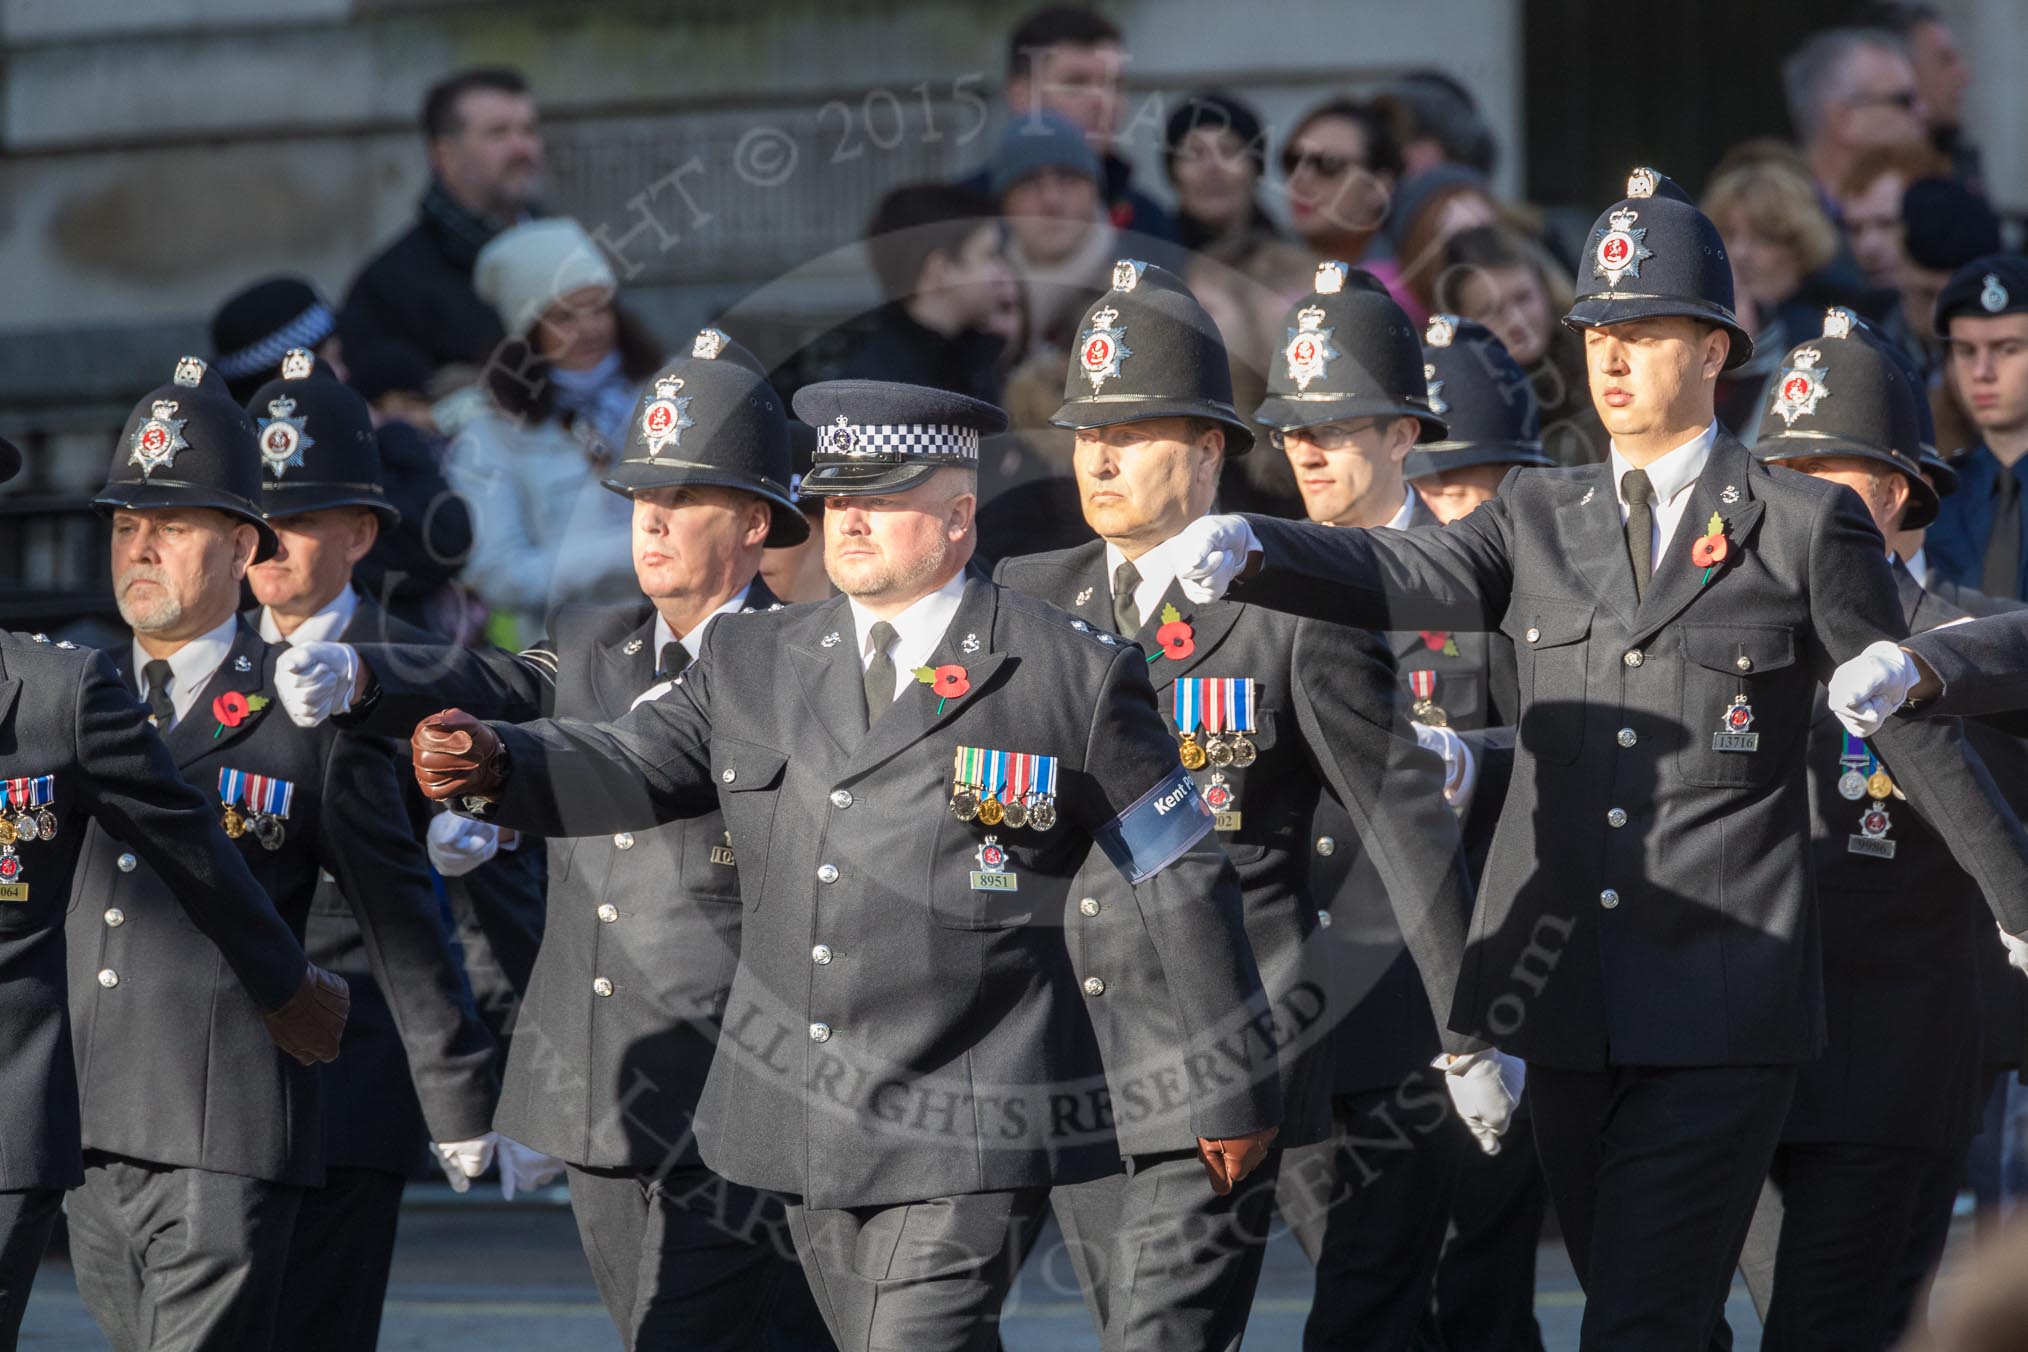 March Past, Remembrance Sunday at the Cenotaph 2016: M39 Kent Police.
Cenotaph, Whitehall, London SW1,
London,
Greater London,
United Kingdom,
on 13 November 2016 at 13:19, image #2929